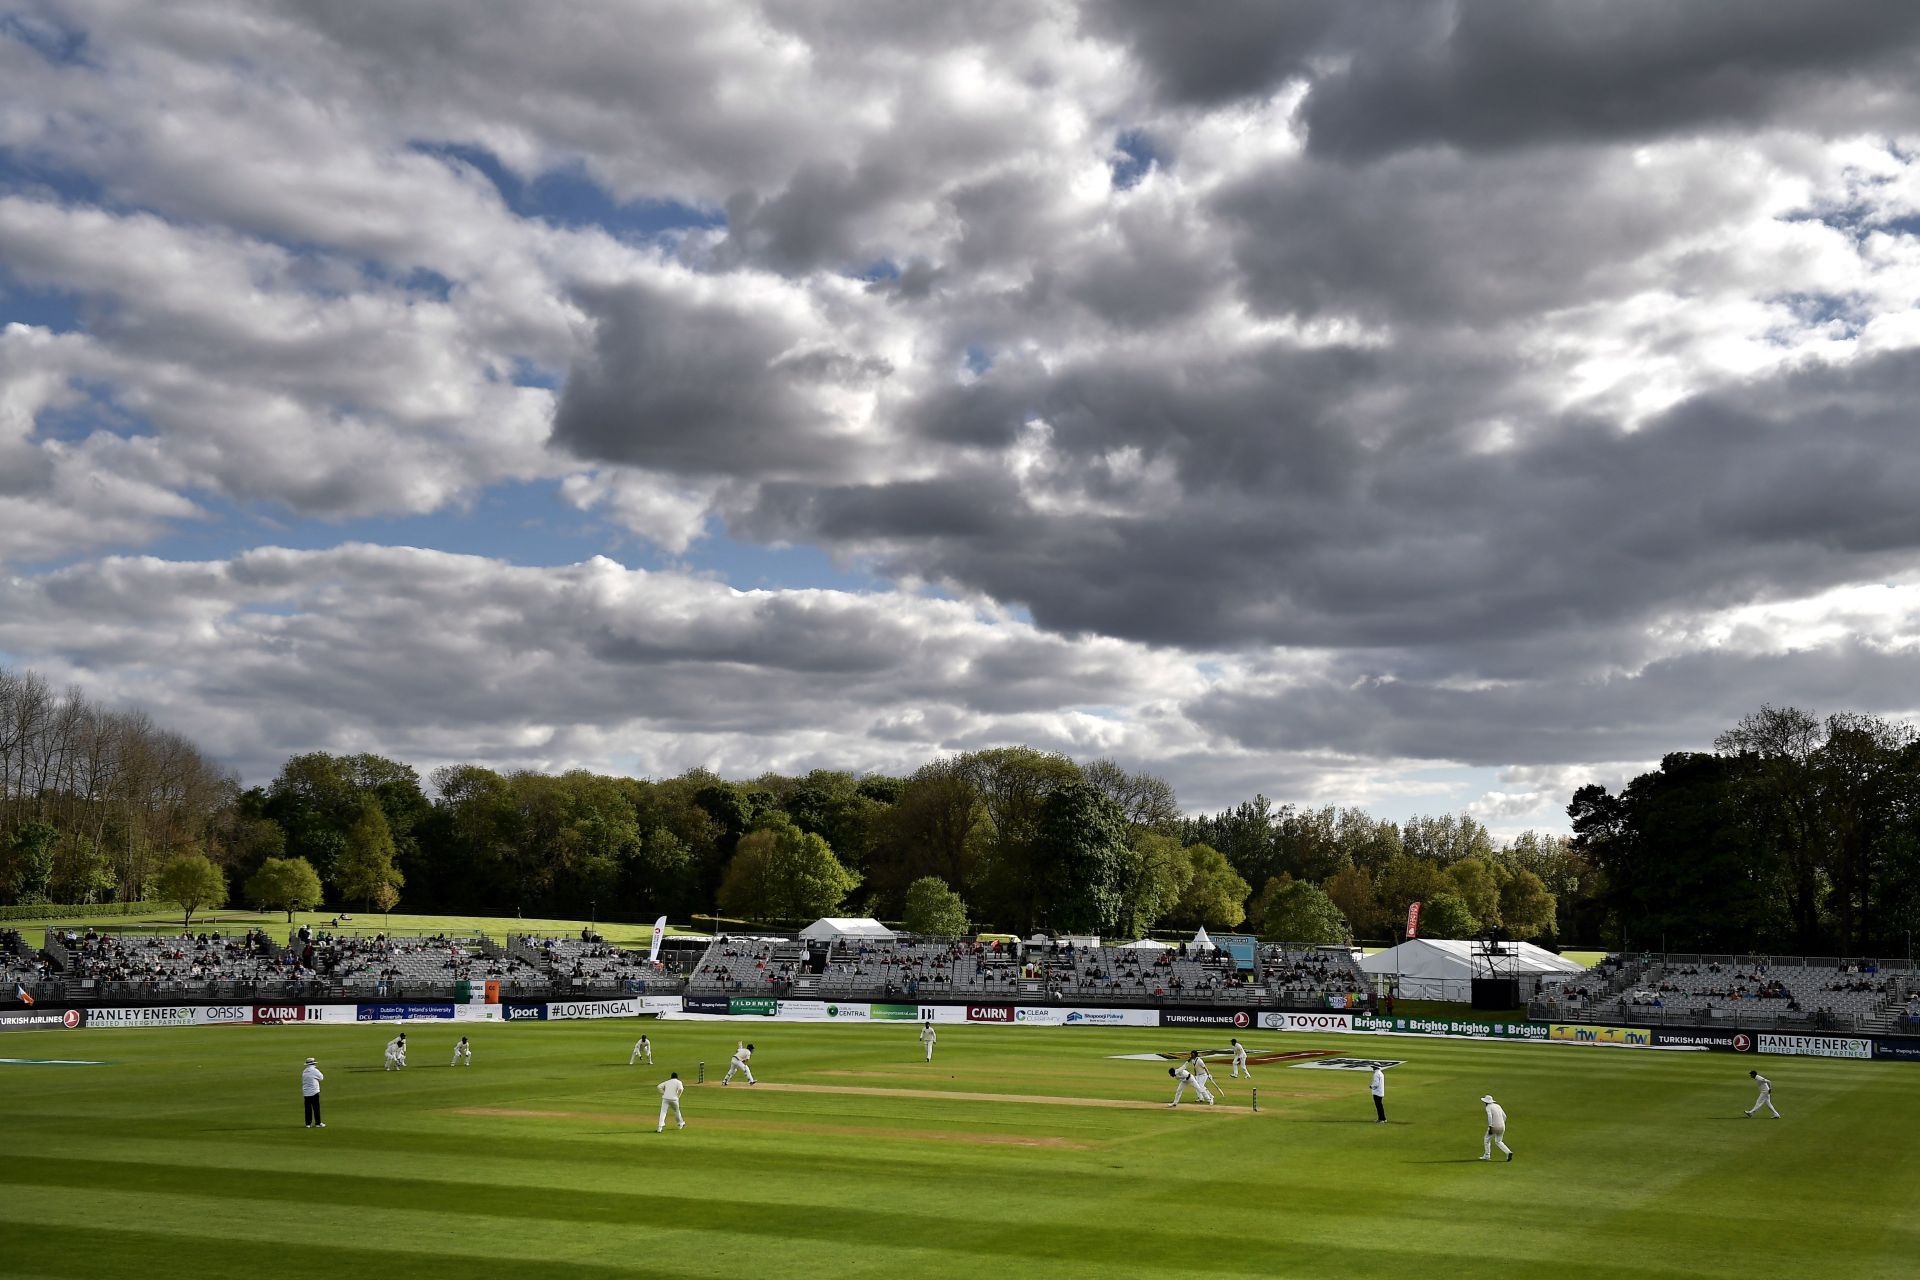 Dublin is playing host to the first T20I of the series between visitors India and hosts Ireland.